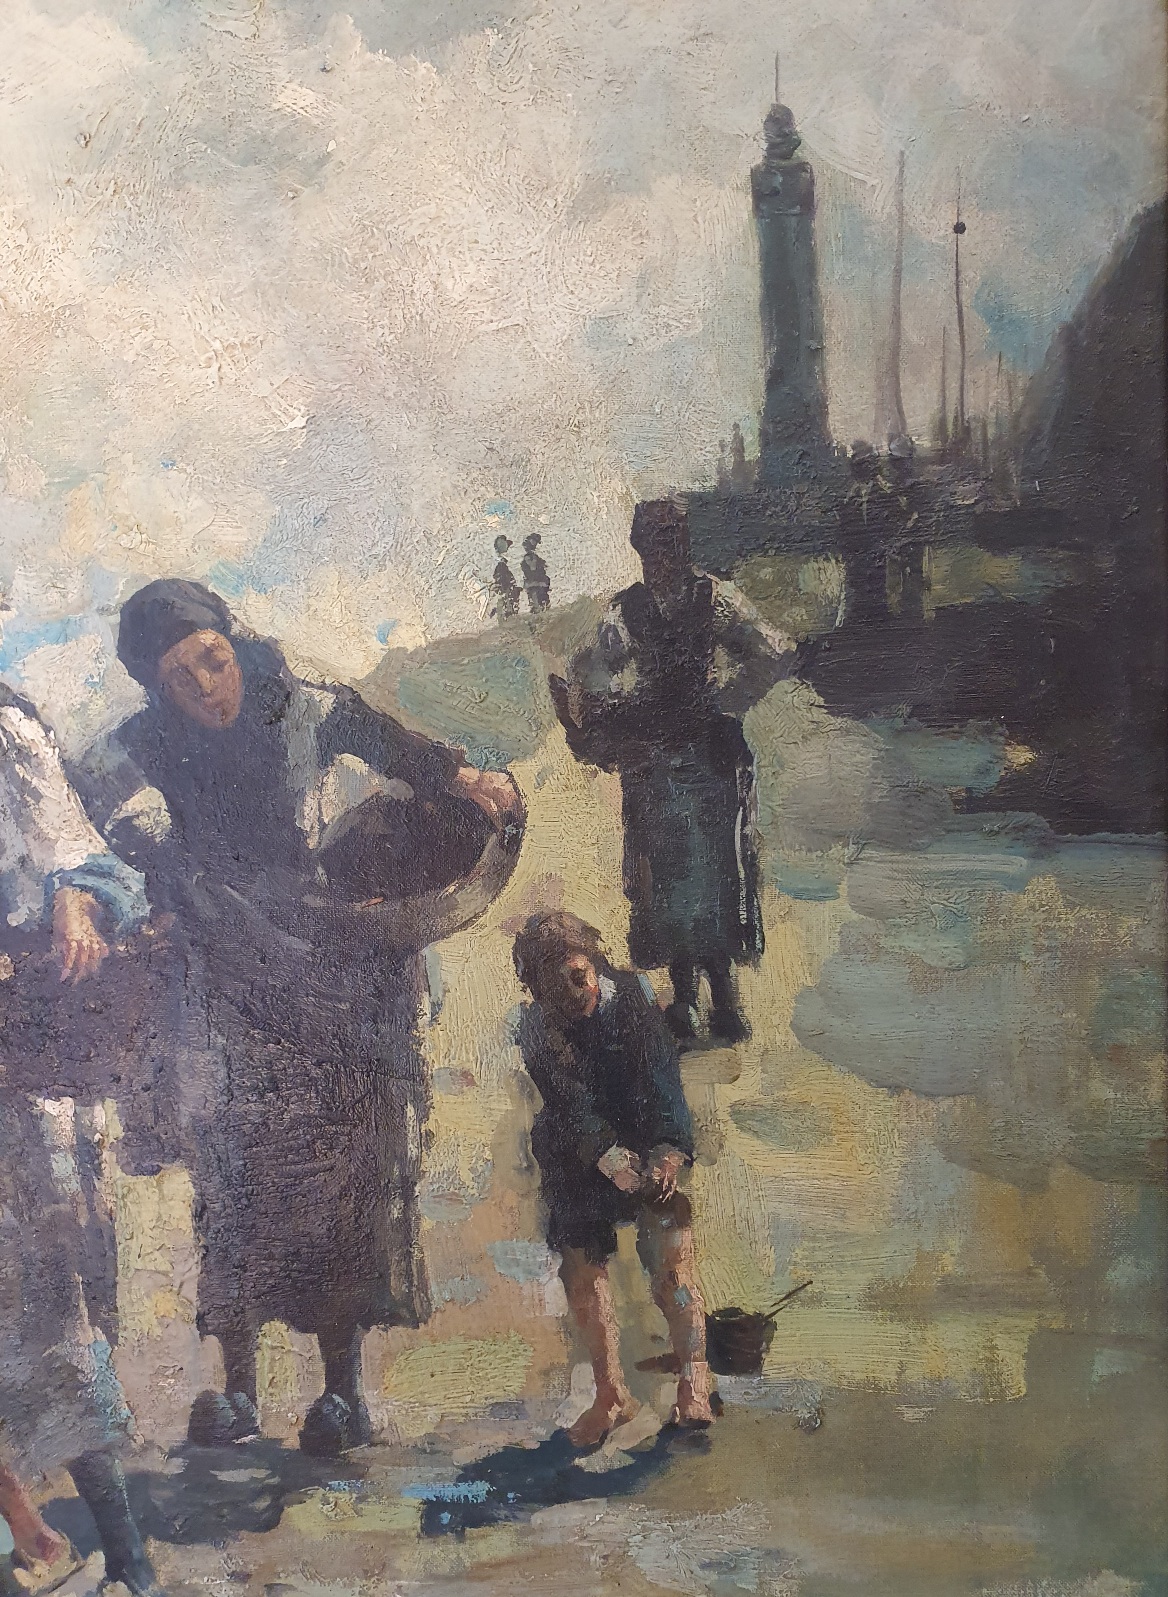 Framed Oil after John Singer Sargent Original Setting Out To Fish. 36 inches x 36 inches - Image 3 of 5